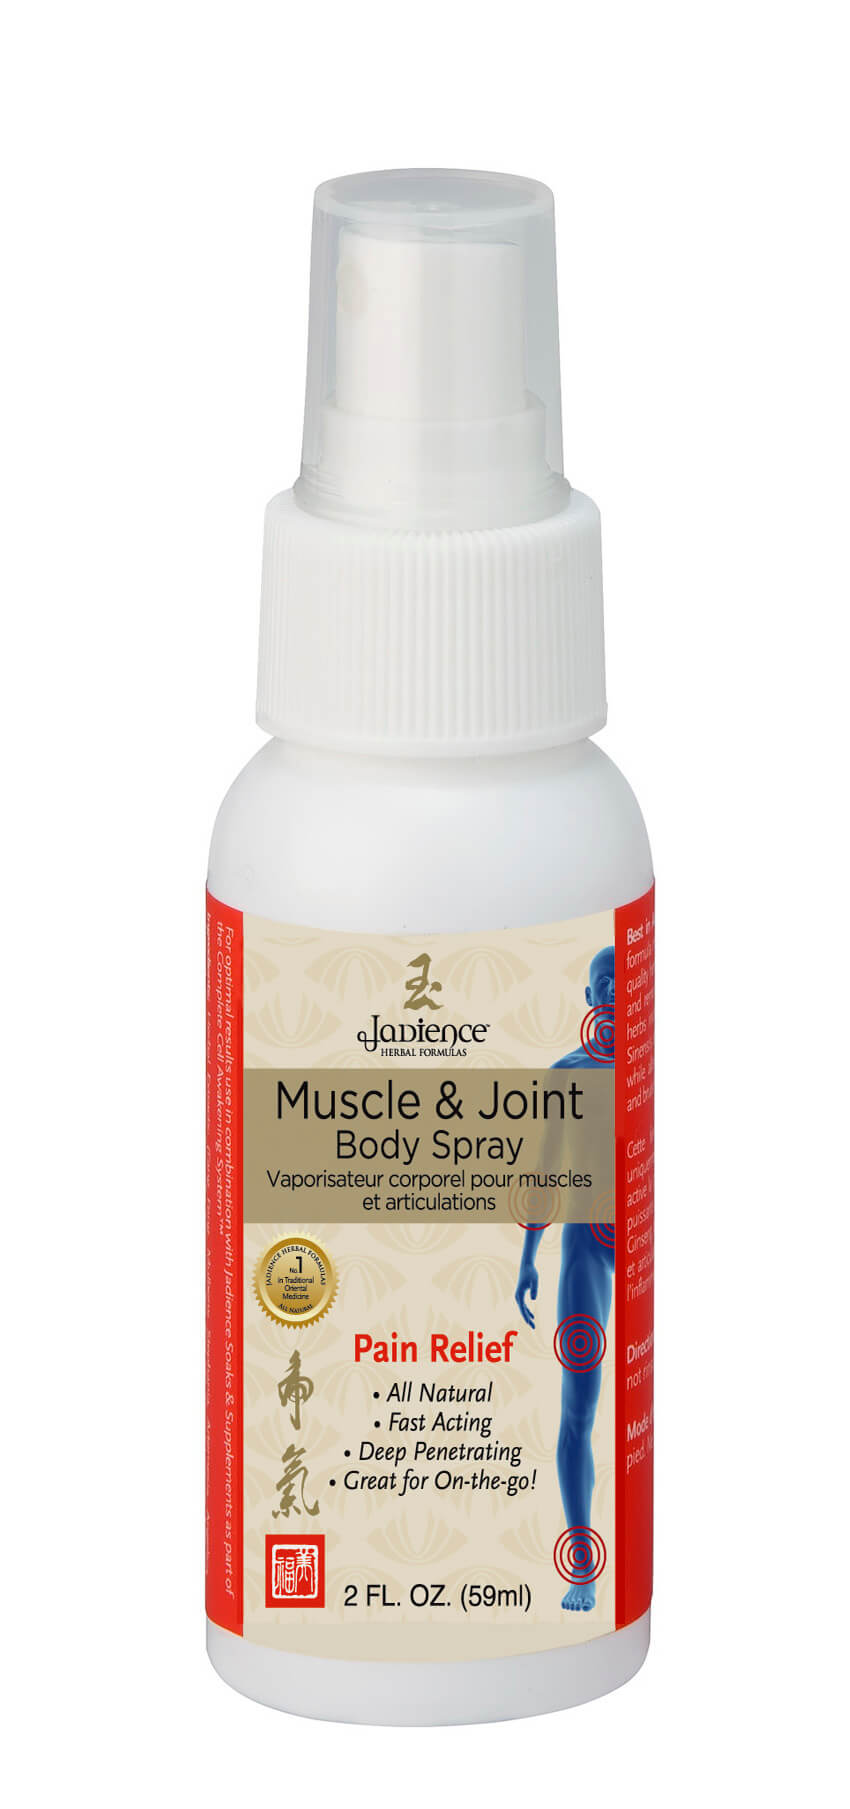 Muscle & Joint Body Spray